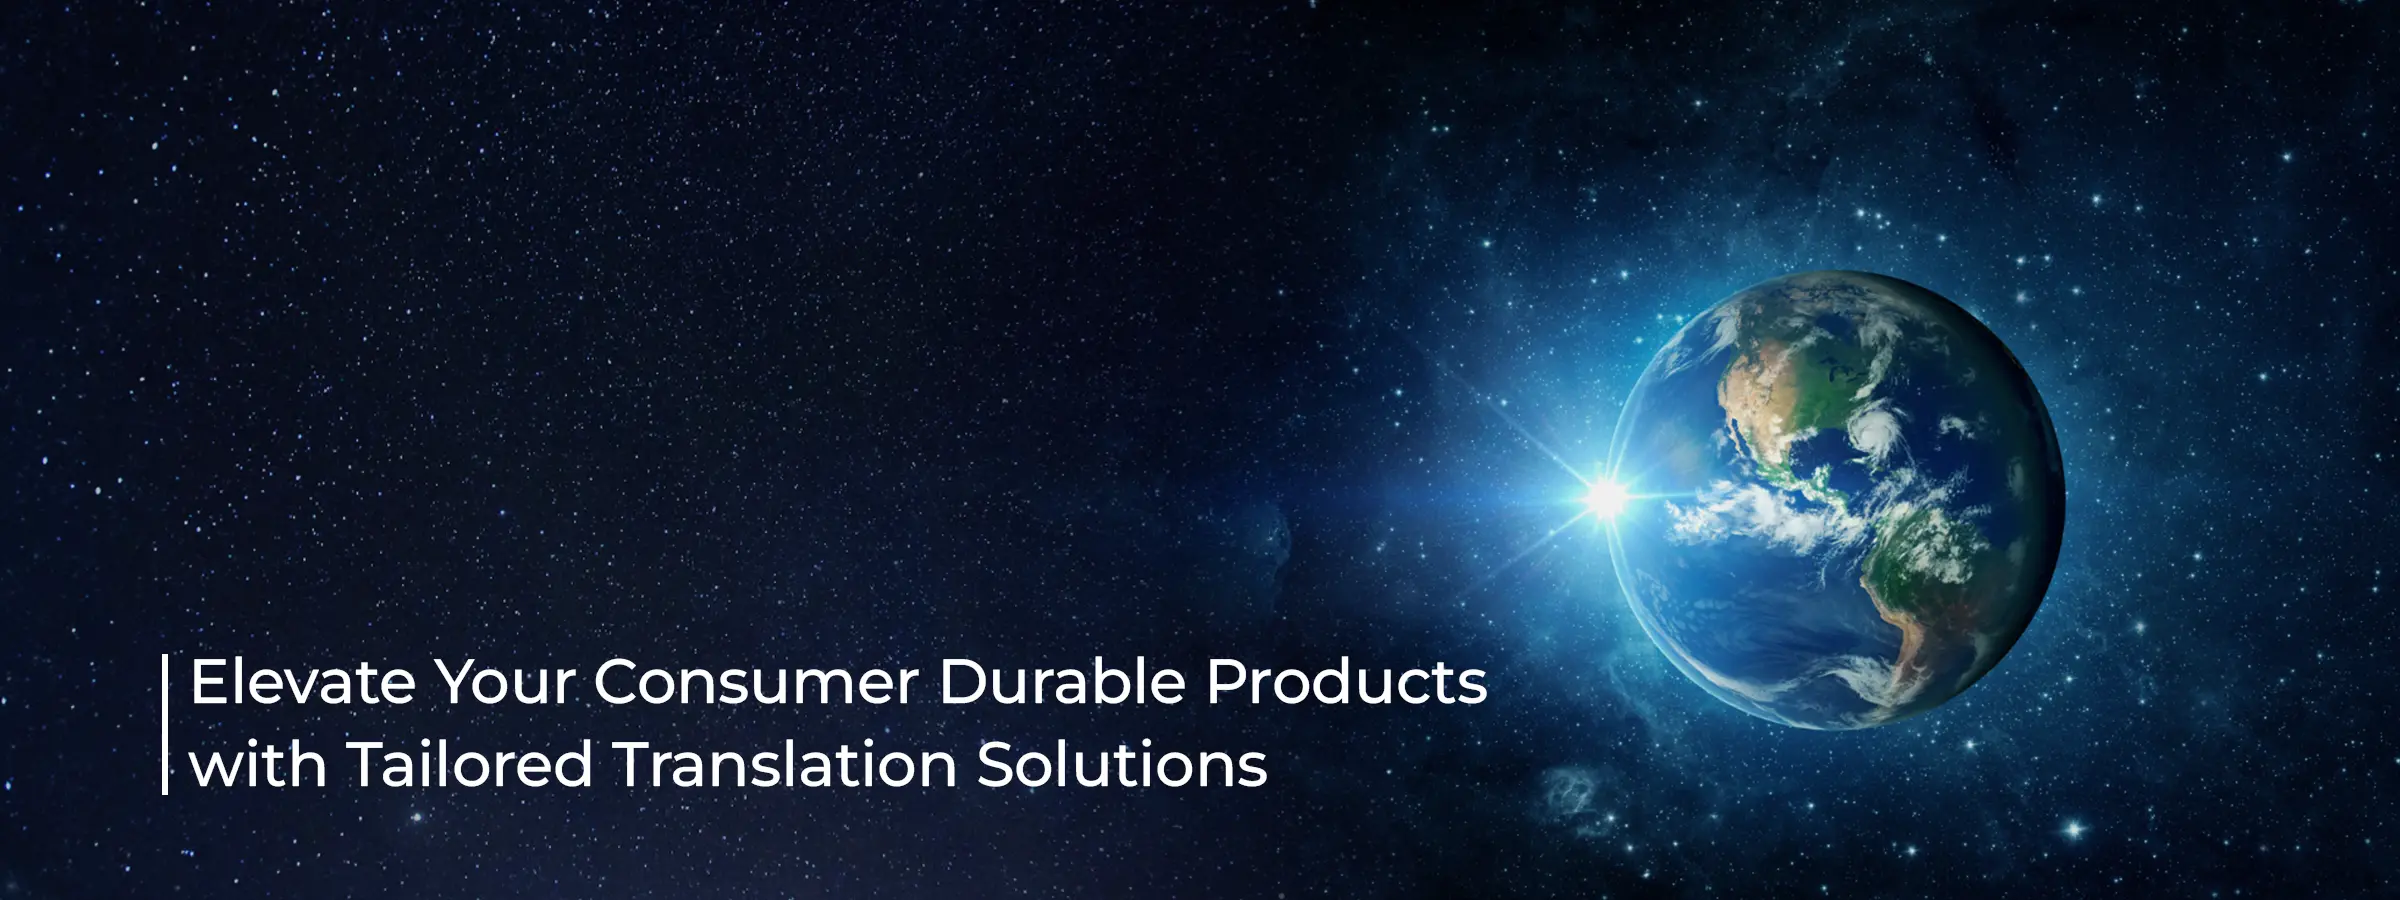 elevate-your-consumer-durable-products-with-tailored-translation-solutions